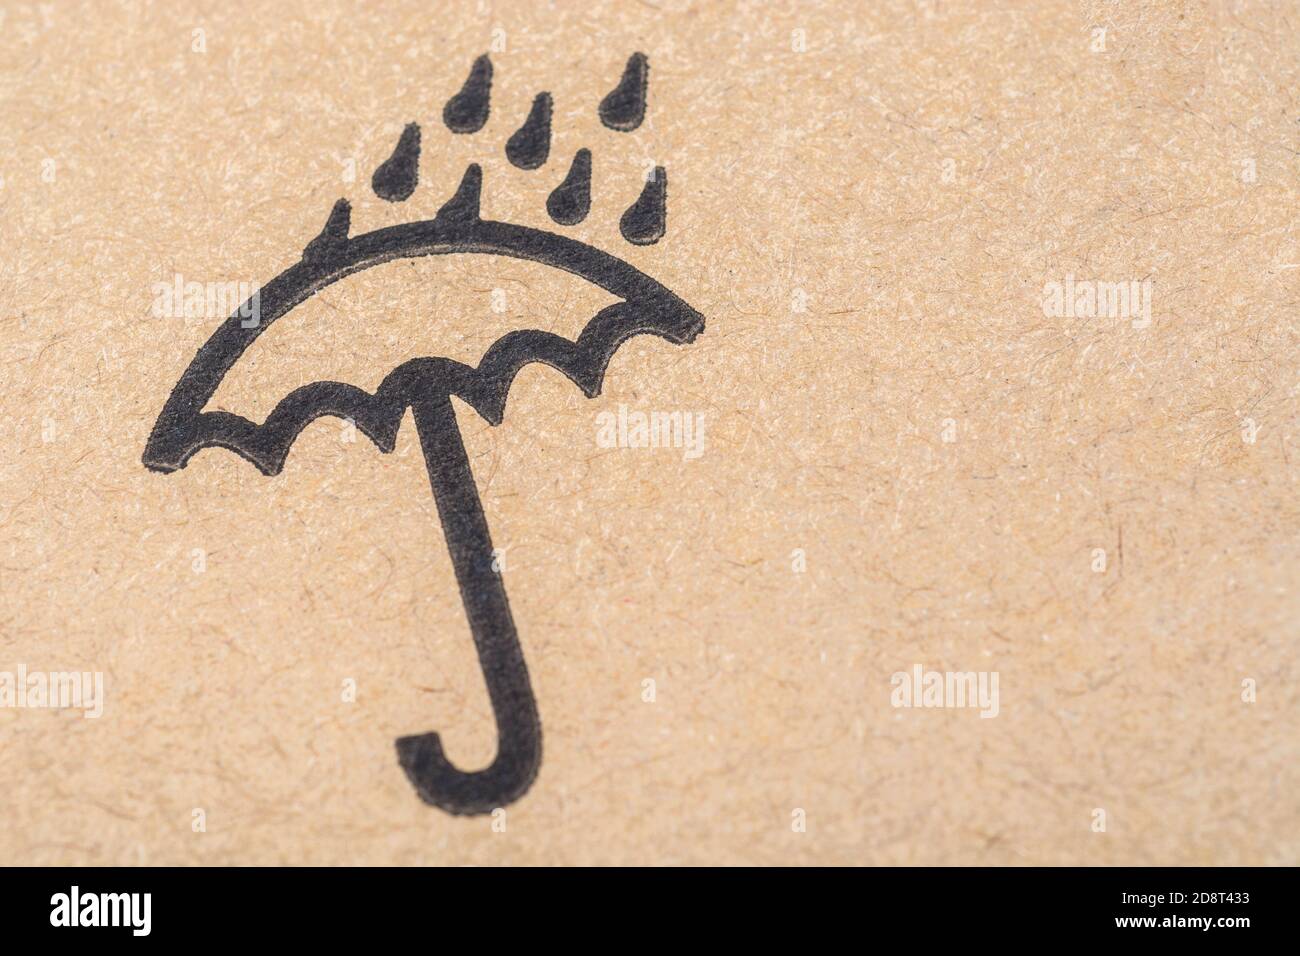 International packaging icon of umbrella with raindrops, meaning keep the contained products dry / out of the rain / away from water. Copy space RHS. Stock Photo